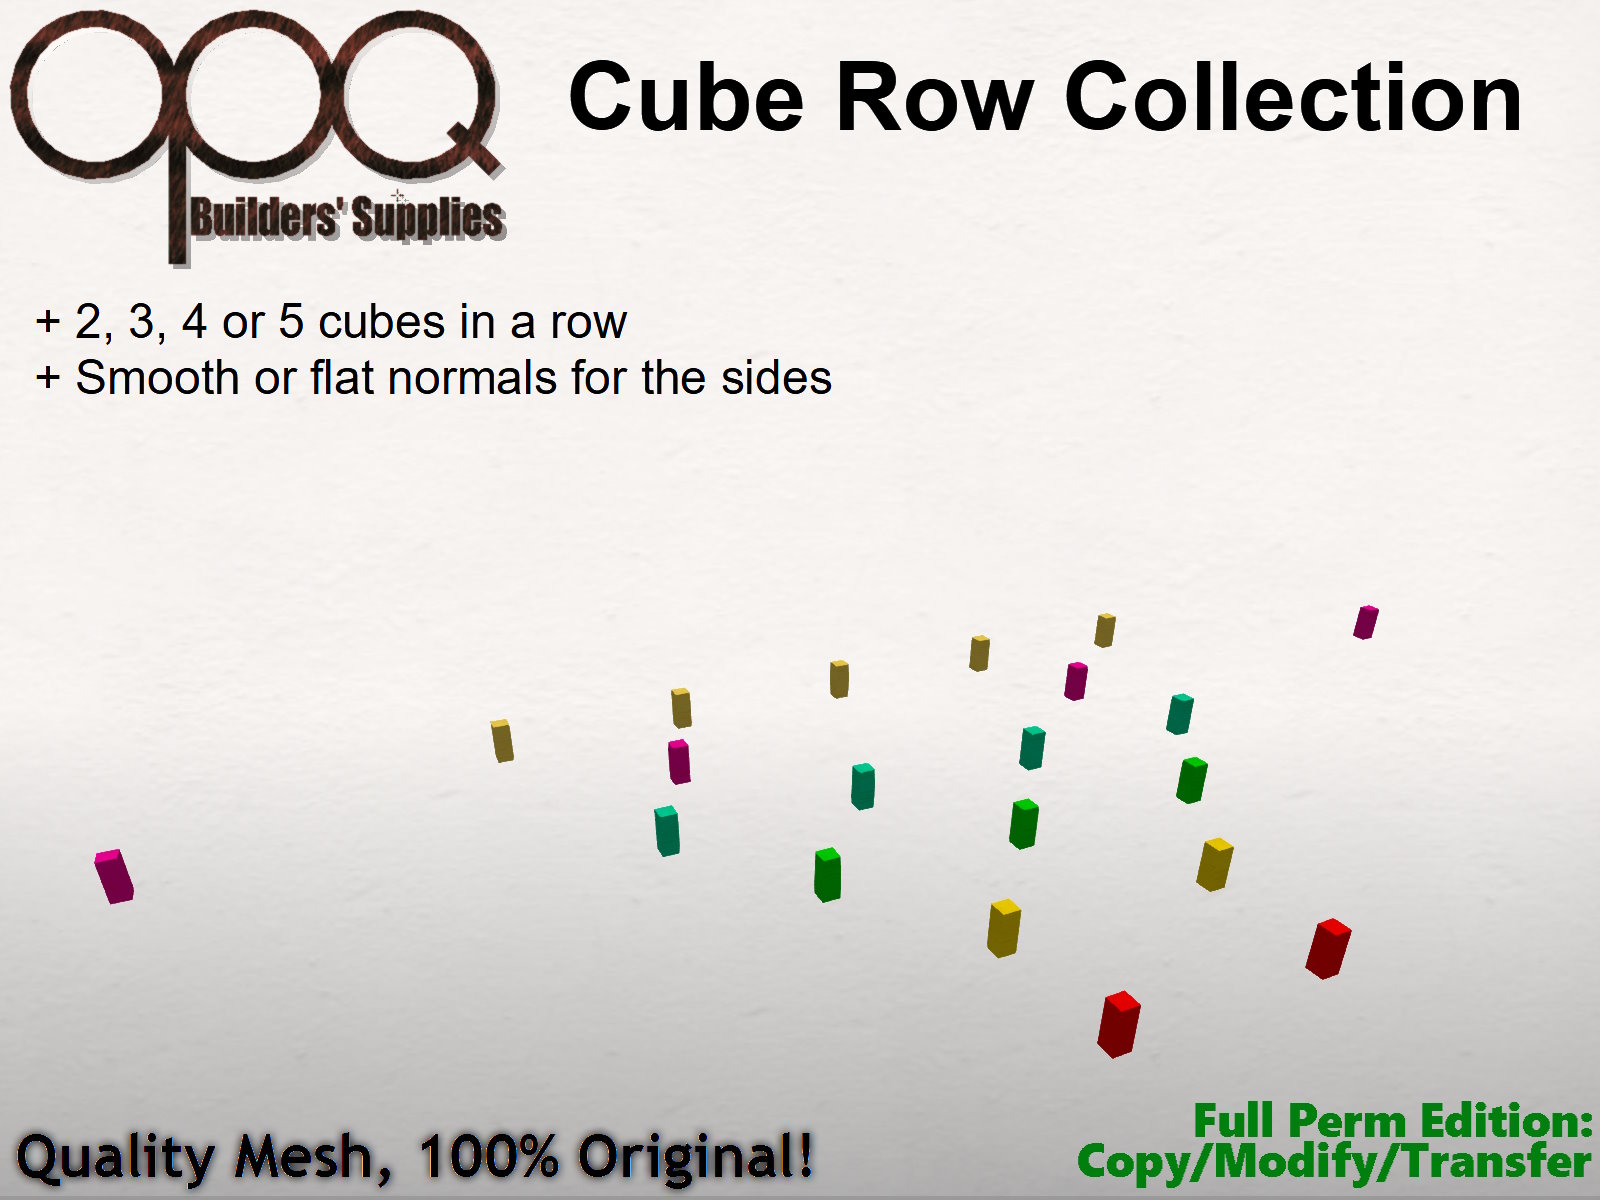 OPQ Cube Row Collection Poster.jpg